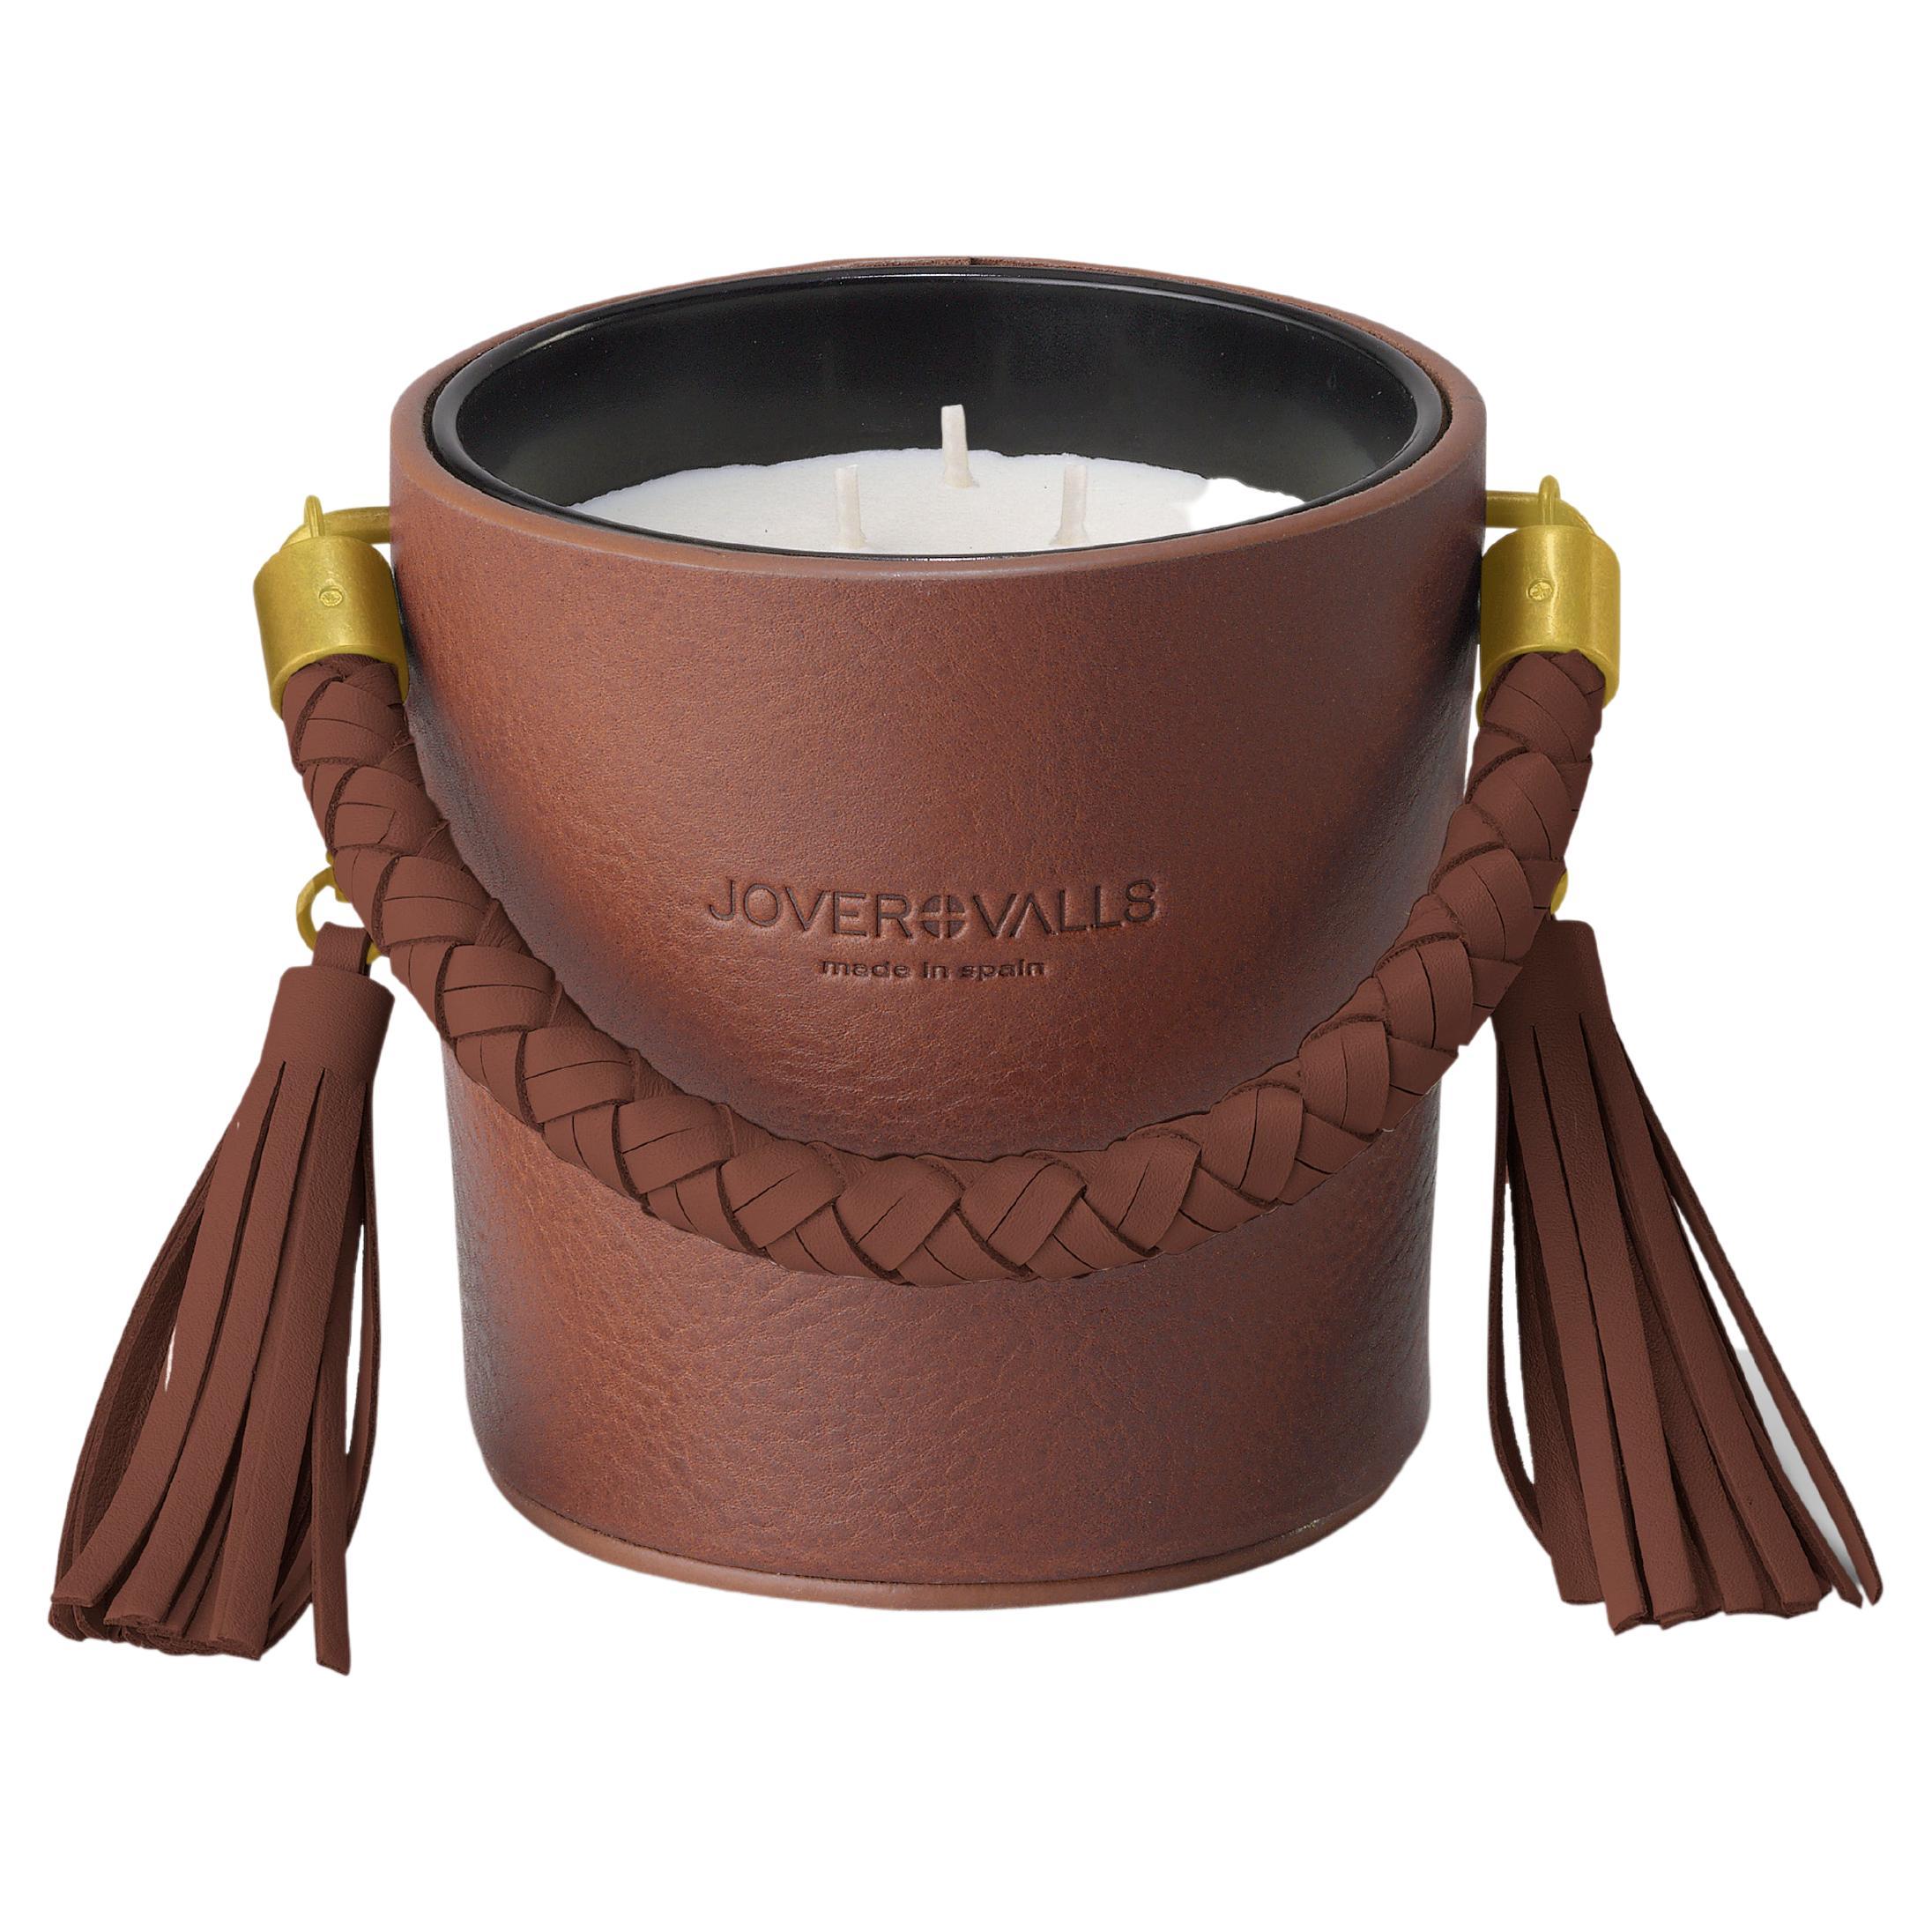 Bucket, Dark Brown Leather Candleholder, Oud Wood & Roses Scented Candle 21 Oz.  For Sale